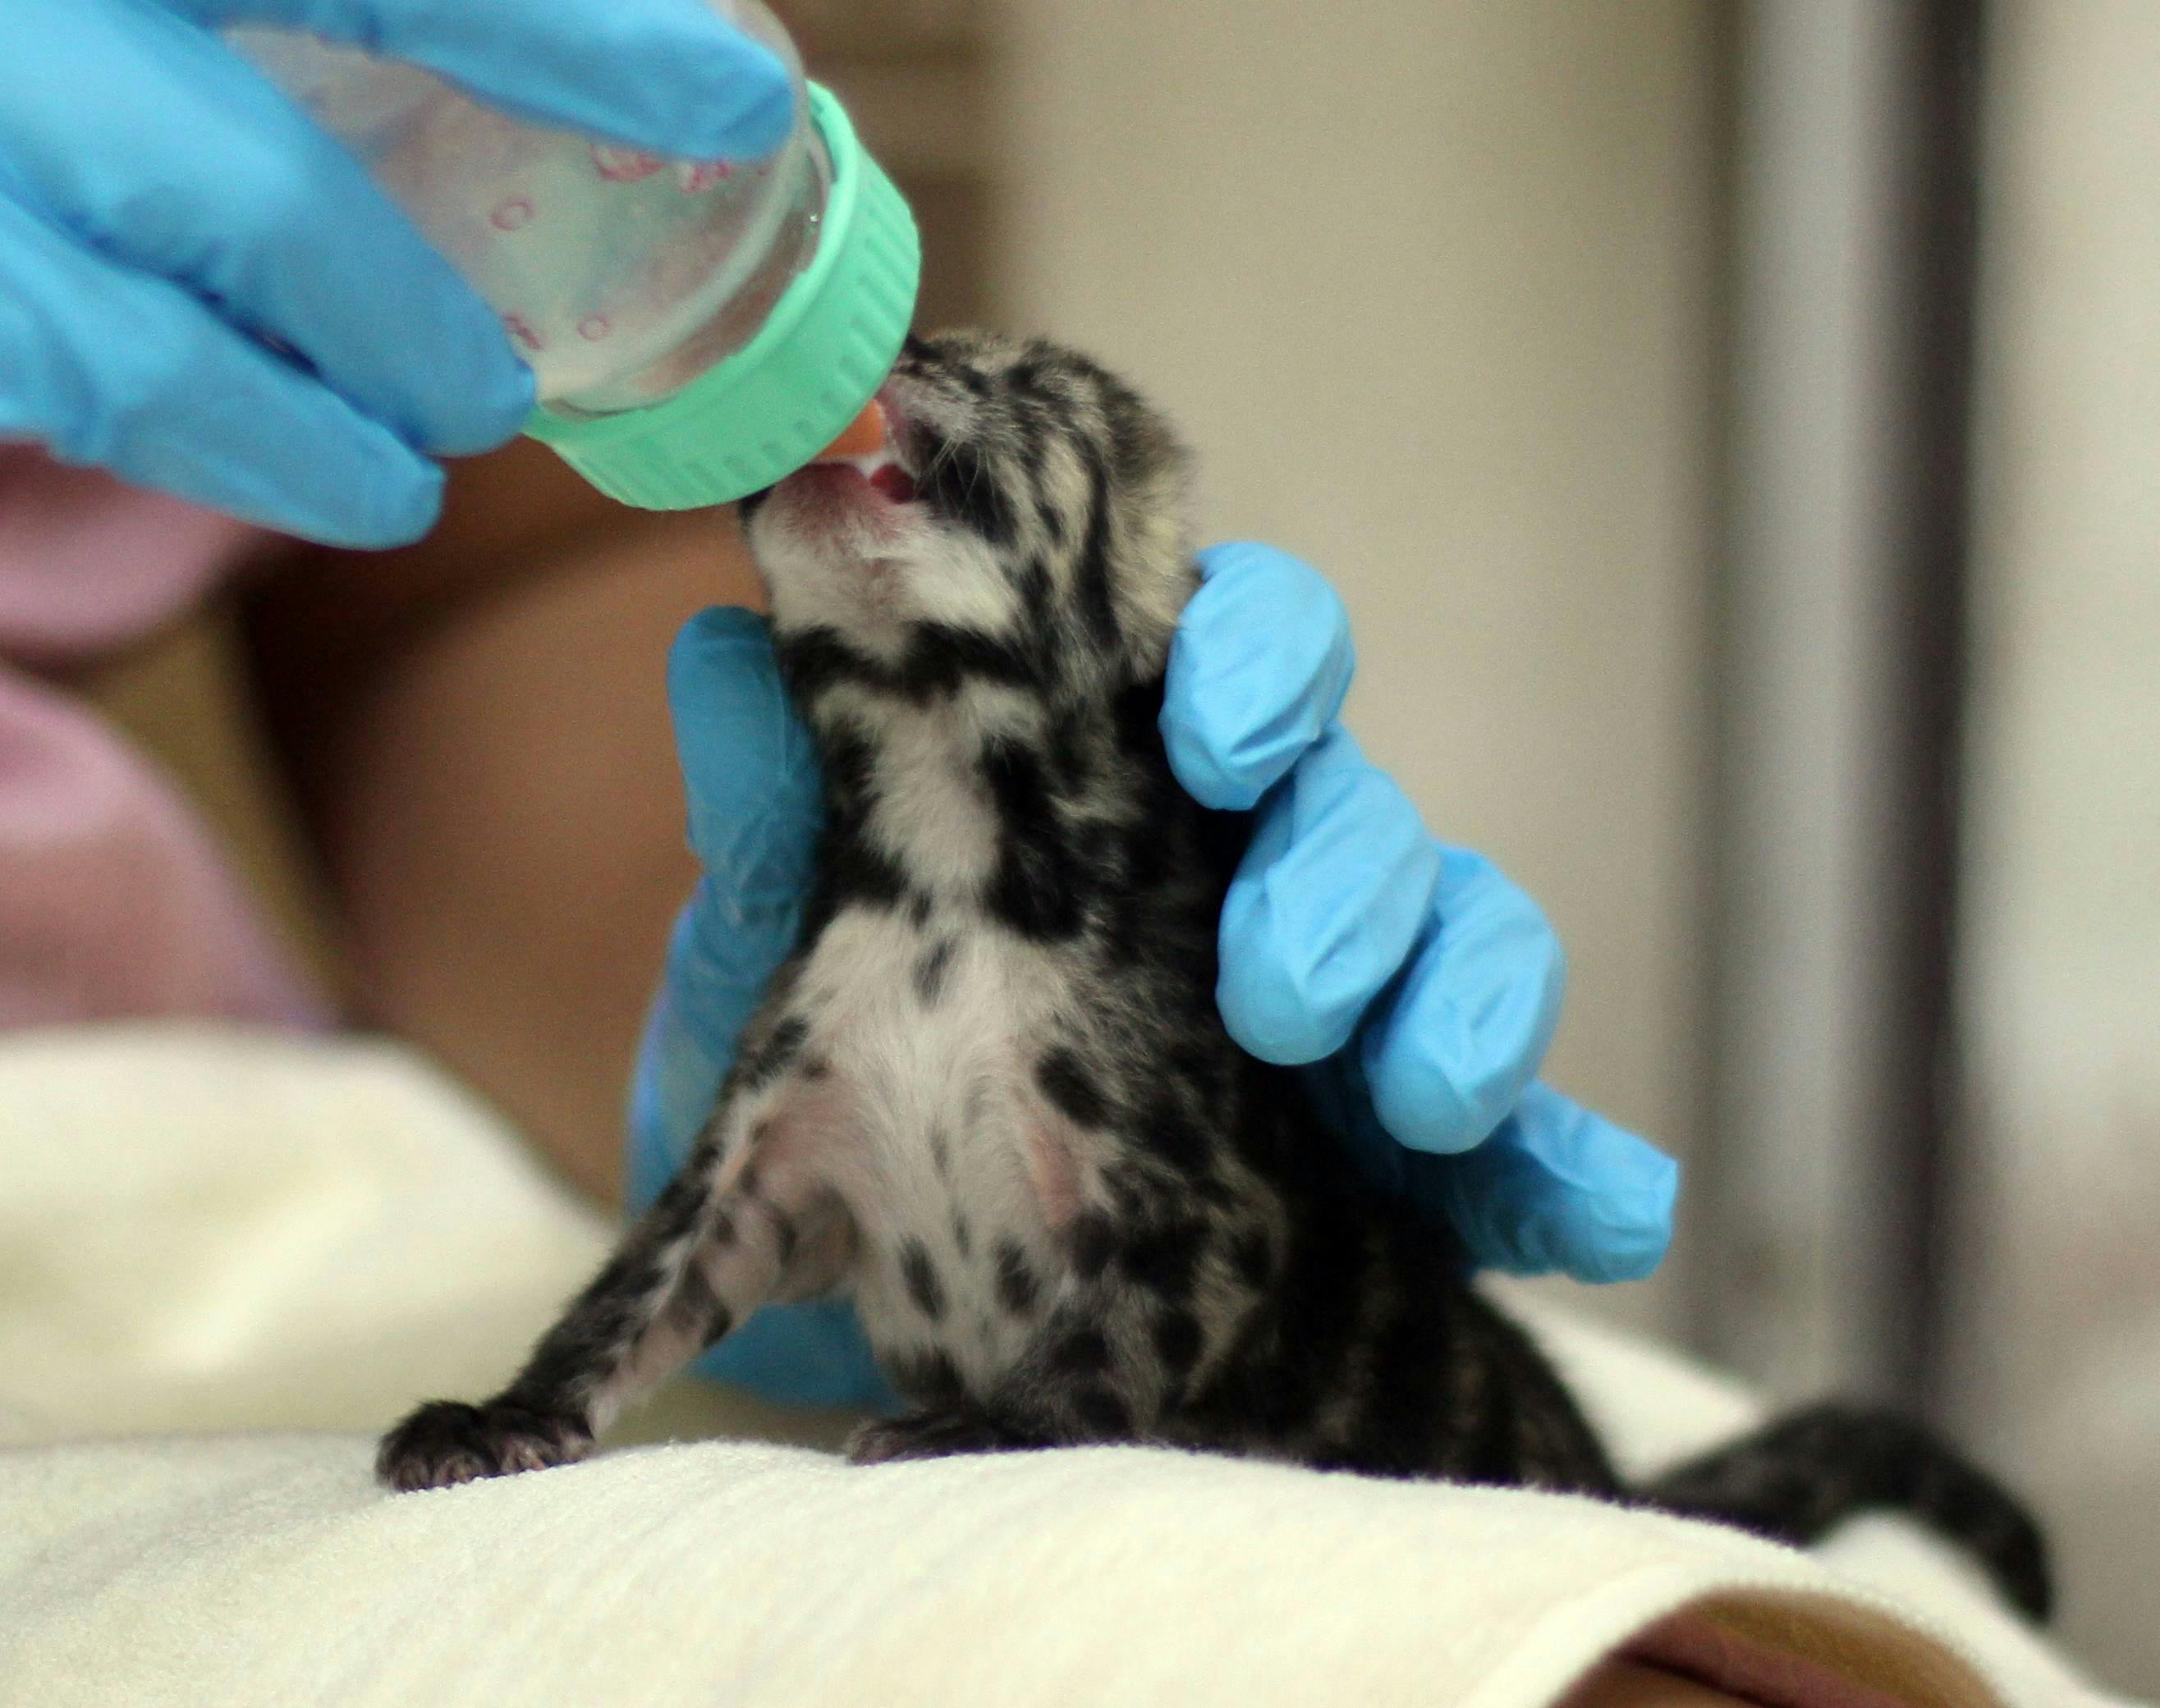 A newborn clouded leopard cub being bottle-fed by a person in blue gloves, sitting upright on a white towel